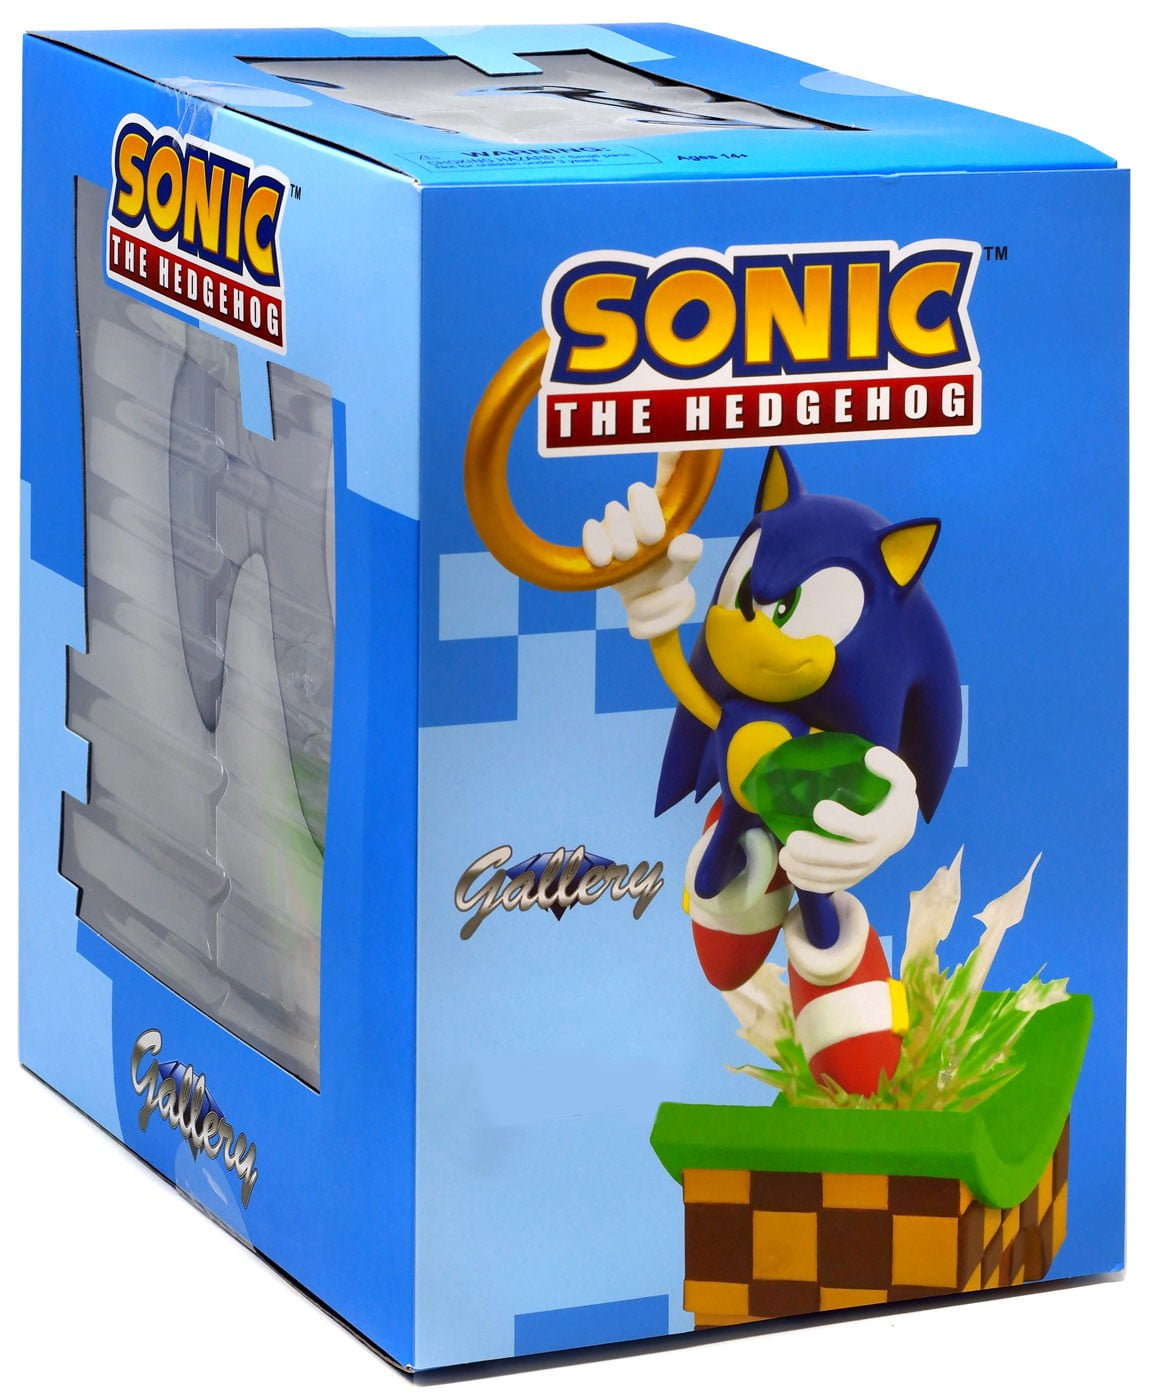 sonic the hedgehog gallery statue